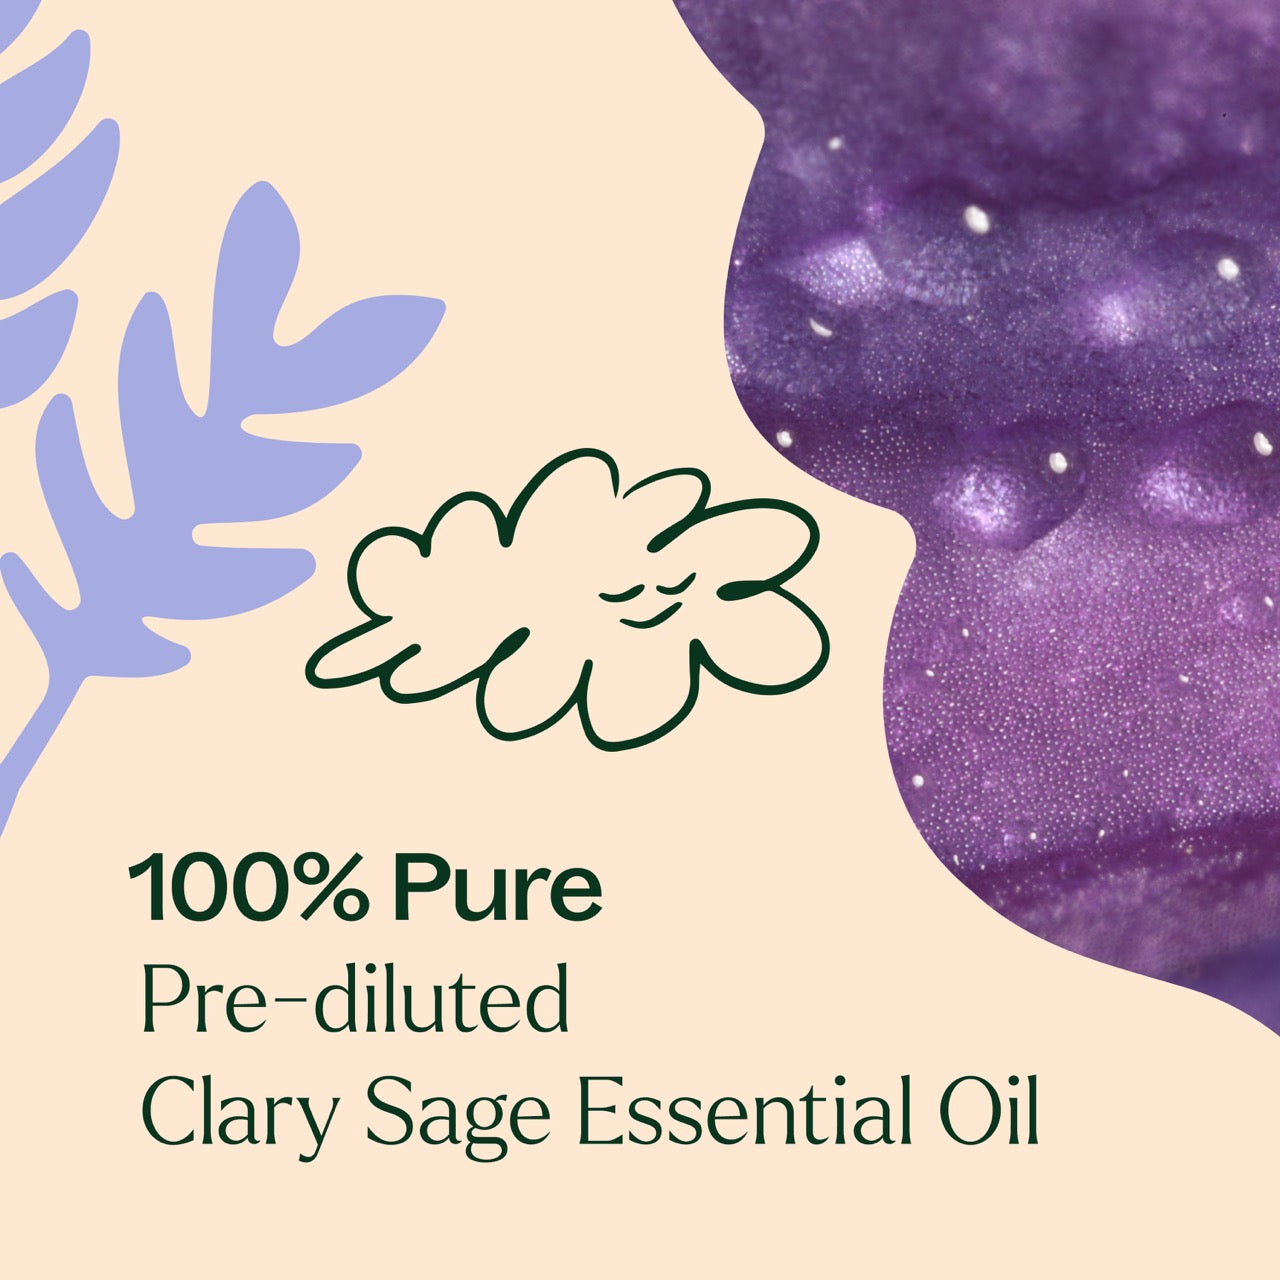 100% pure prediluted Clary Sage Essential Oil